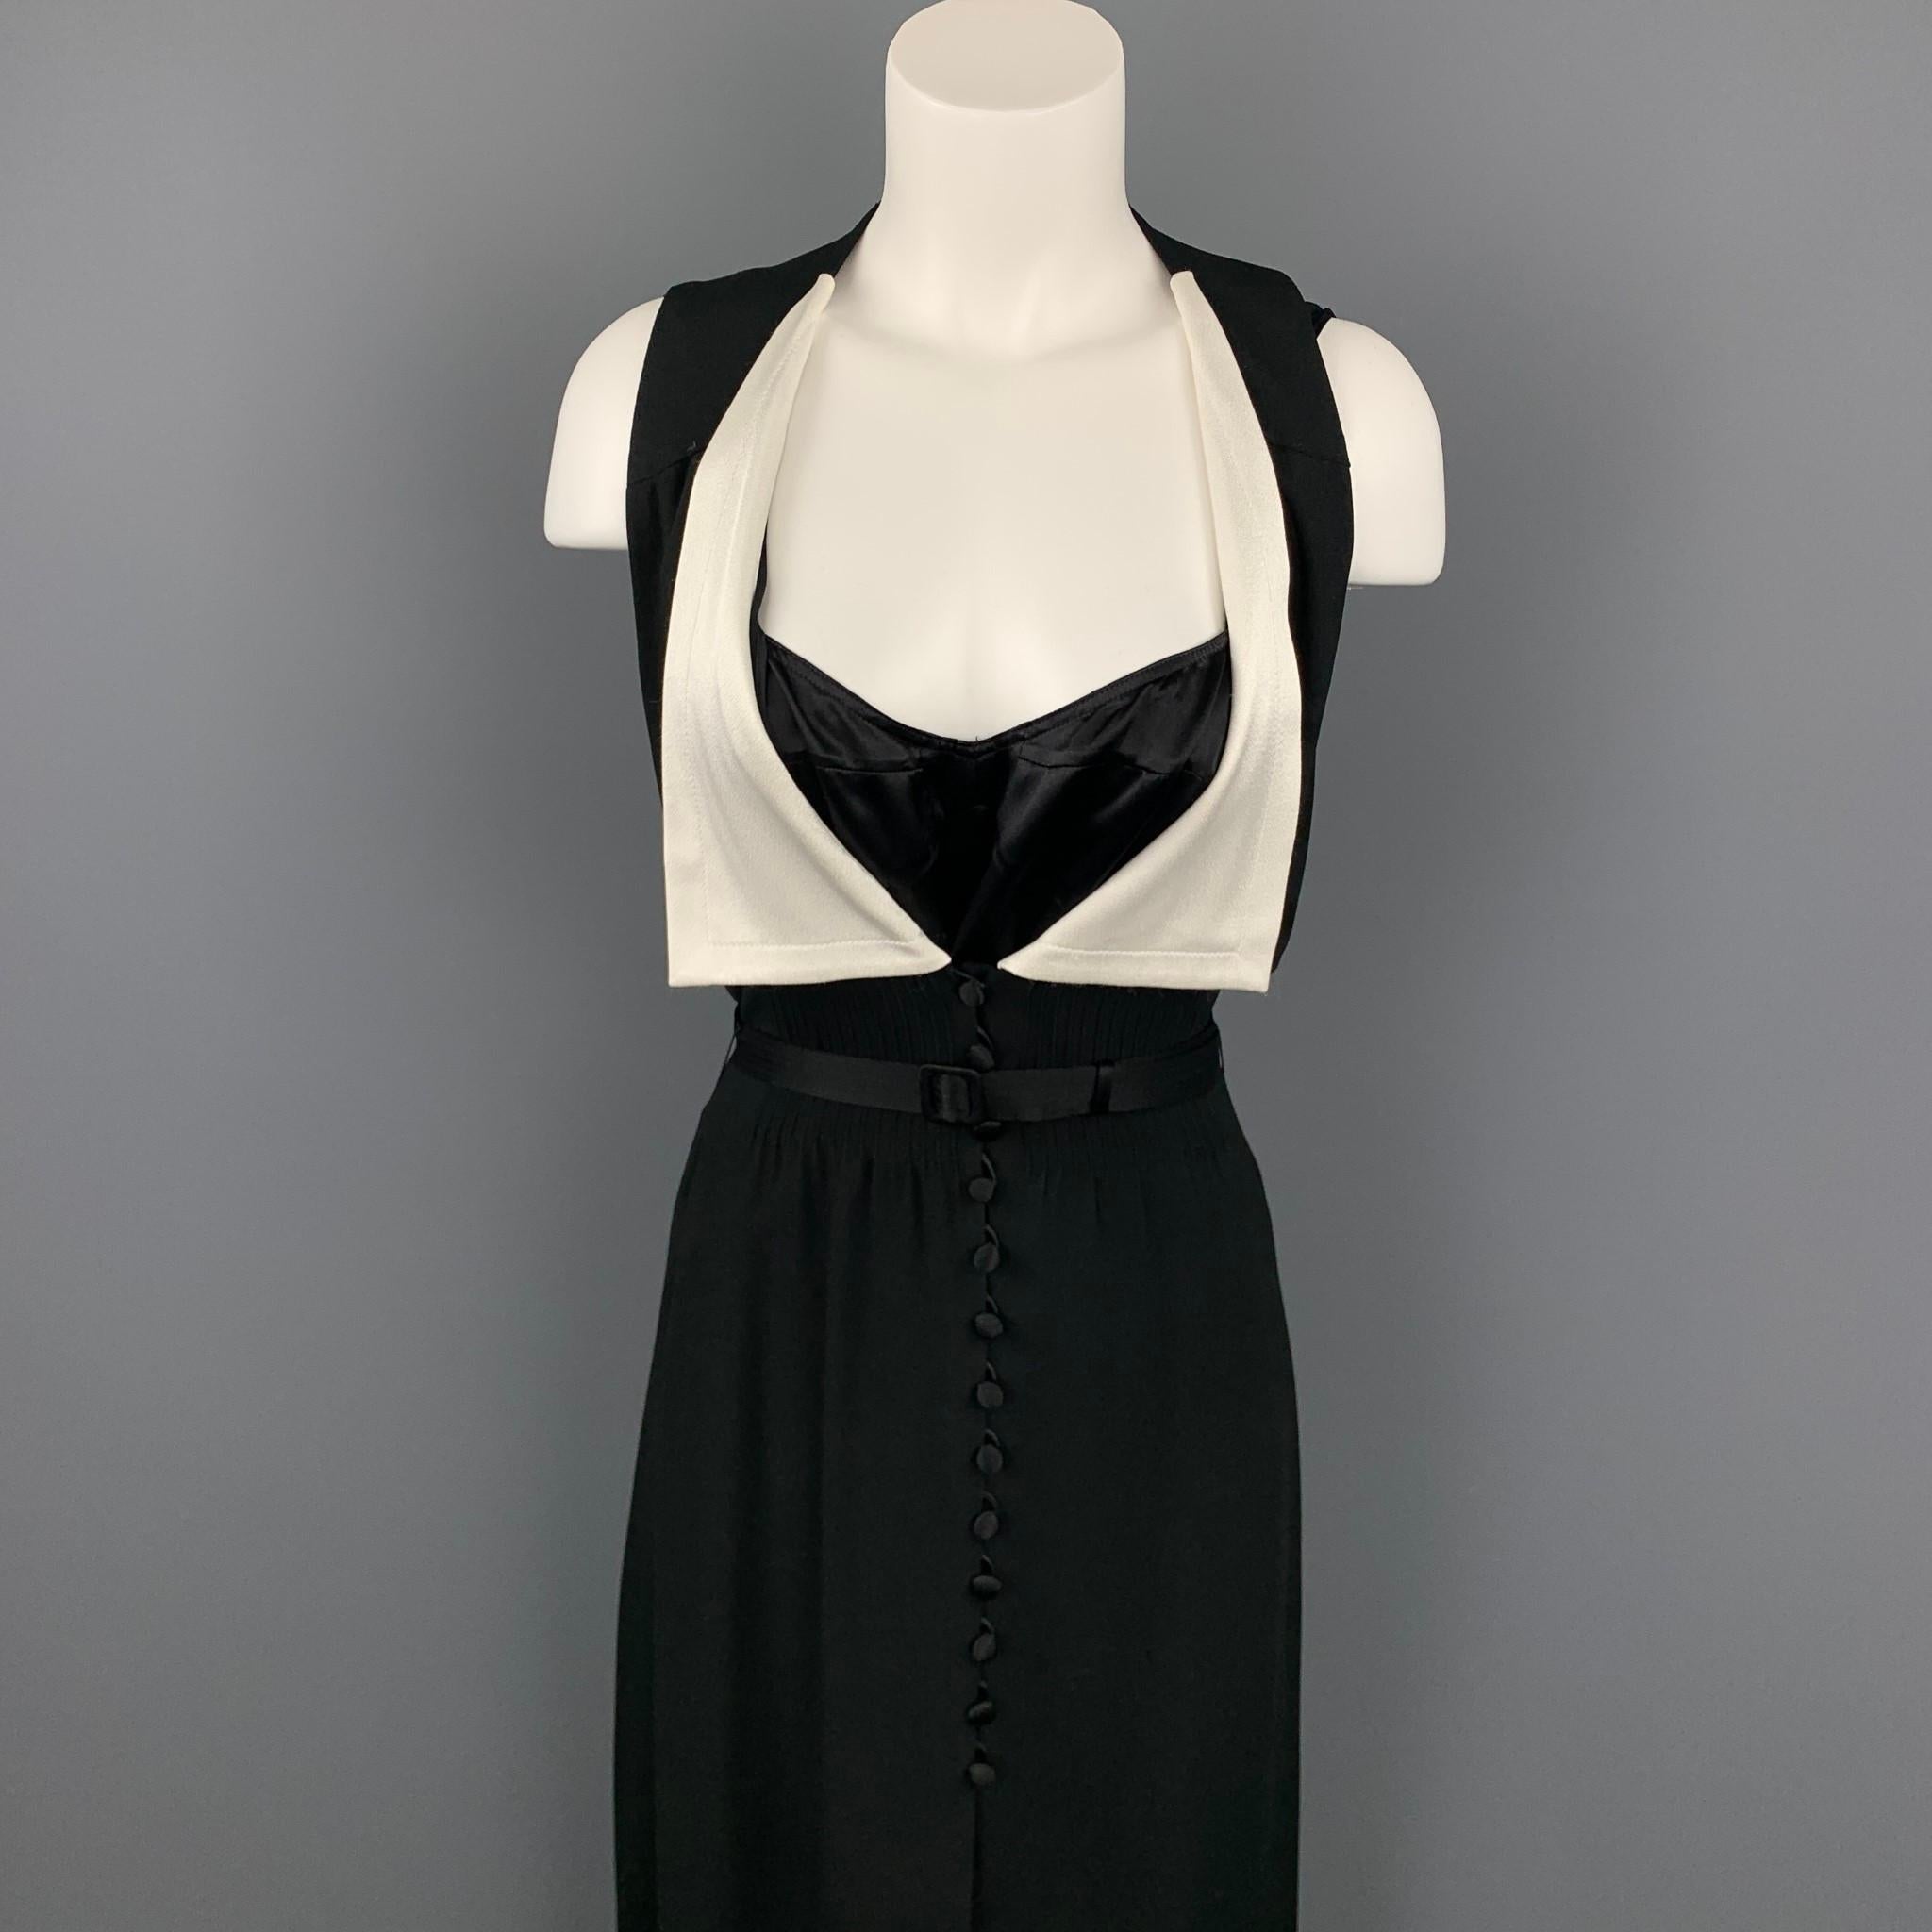 MARC JACOBS dress comes in a black crepe acetate / viscose with a slip liner featuring a belted styled, white collar, open back, and a front buttoned closure.

Good Pre-Owned Condition.
Marked: 6

Measurements:

Shoulder: 12.5 in. 
Bust: 32 in.